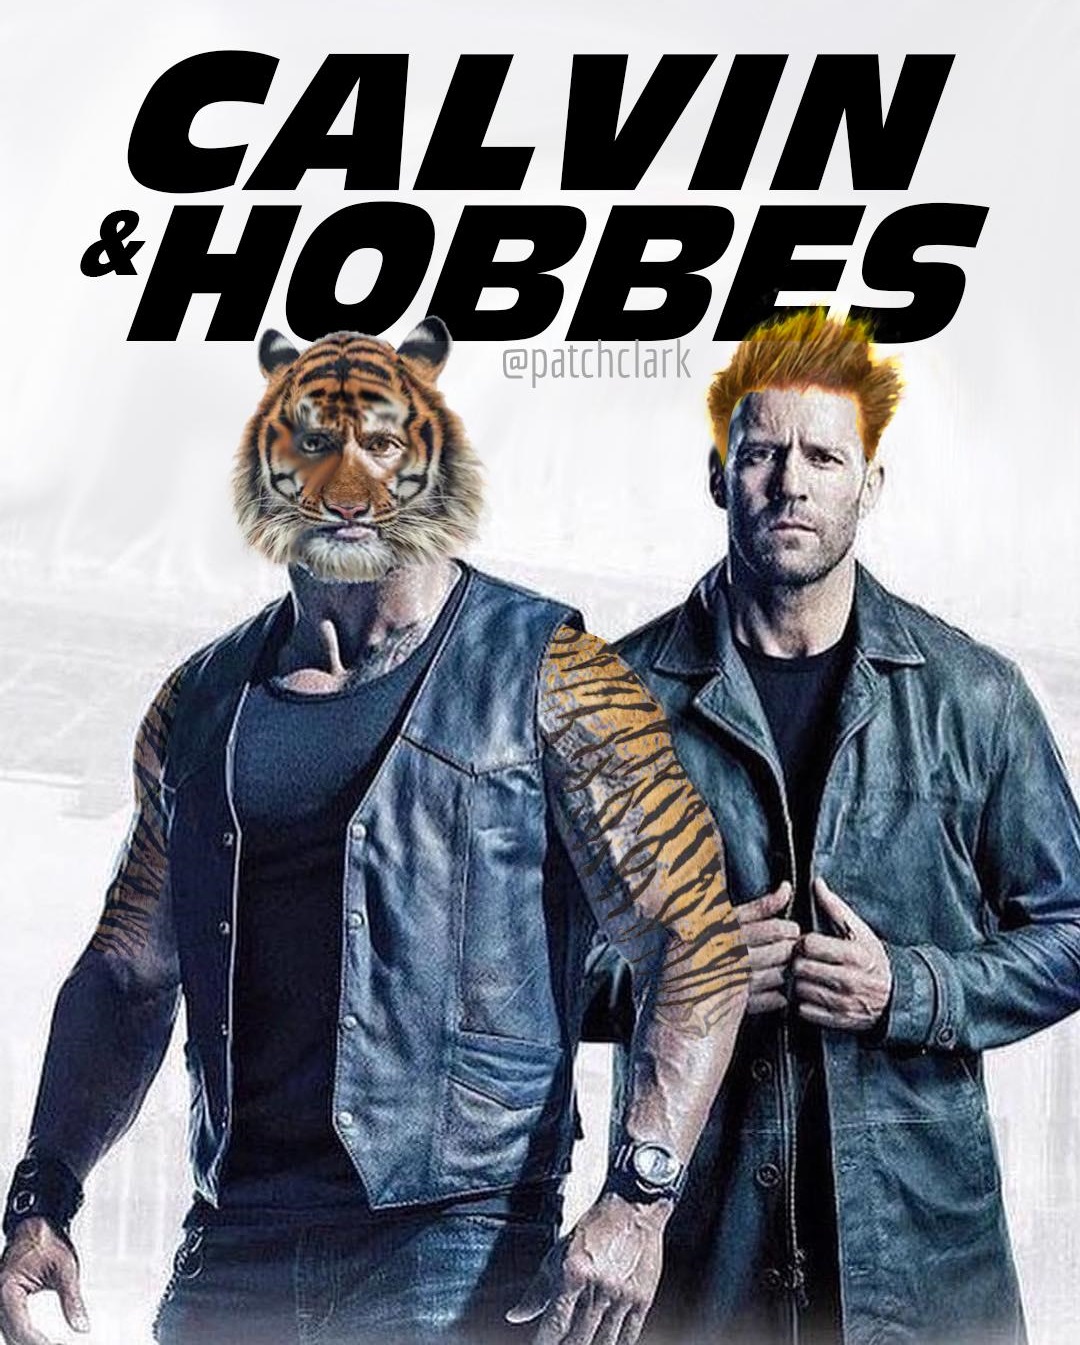 hobbs and shaw release date - Calvin &Hobbes